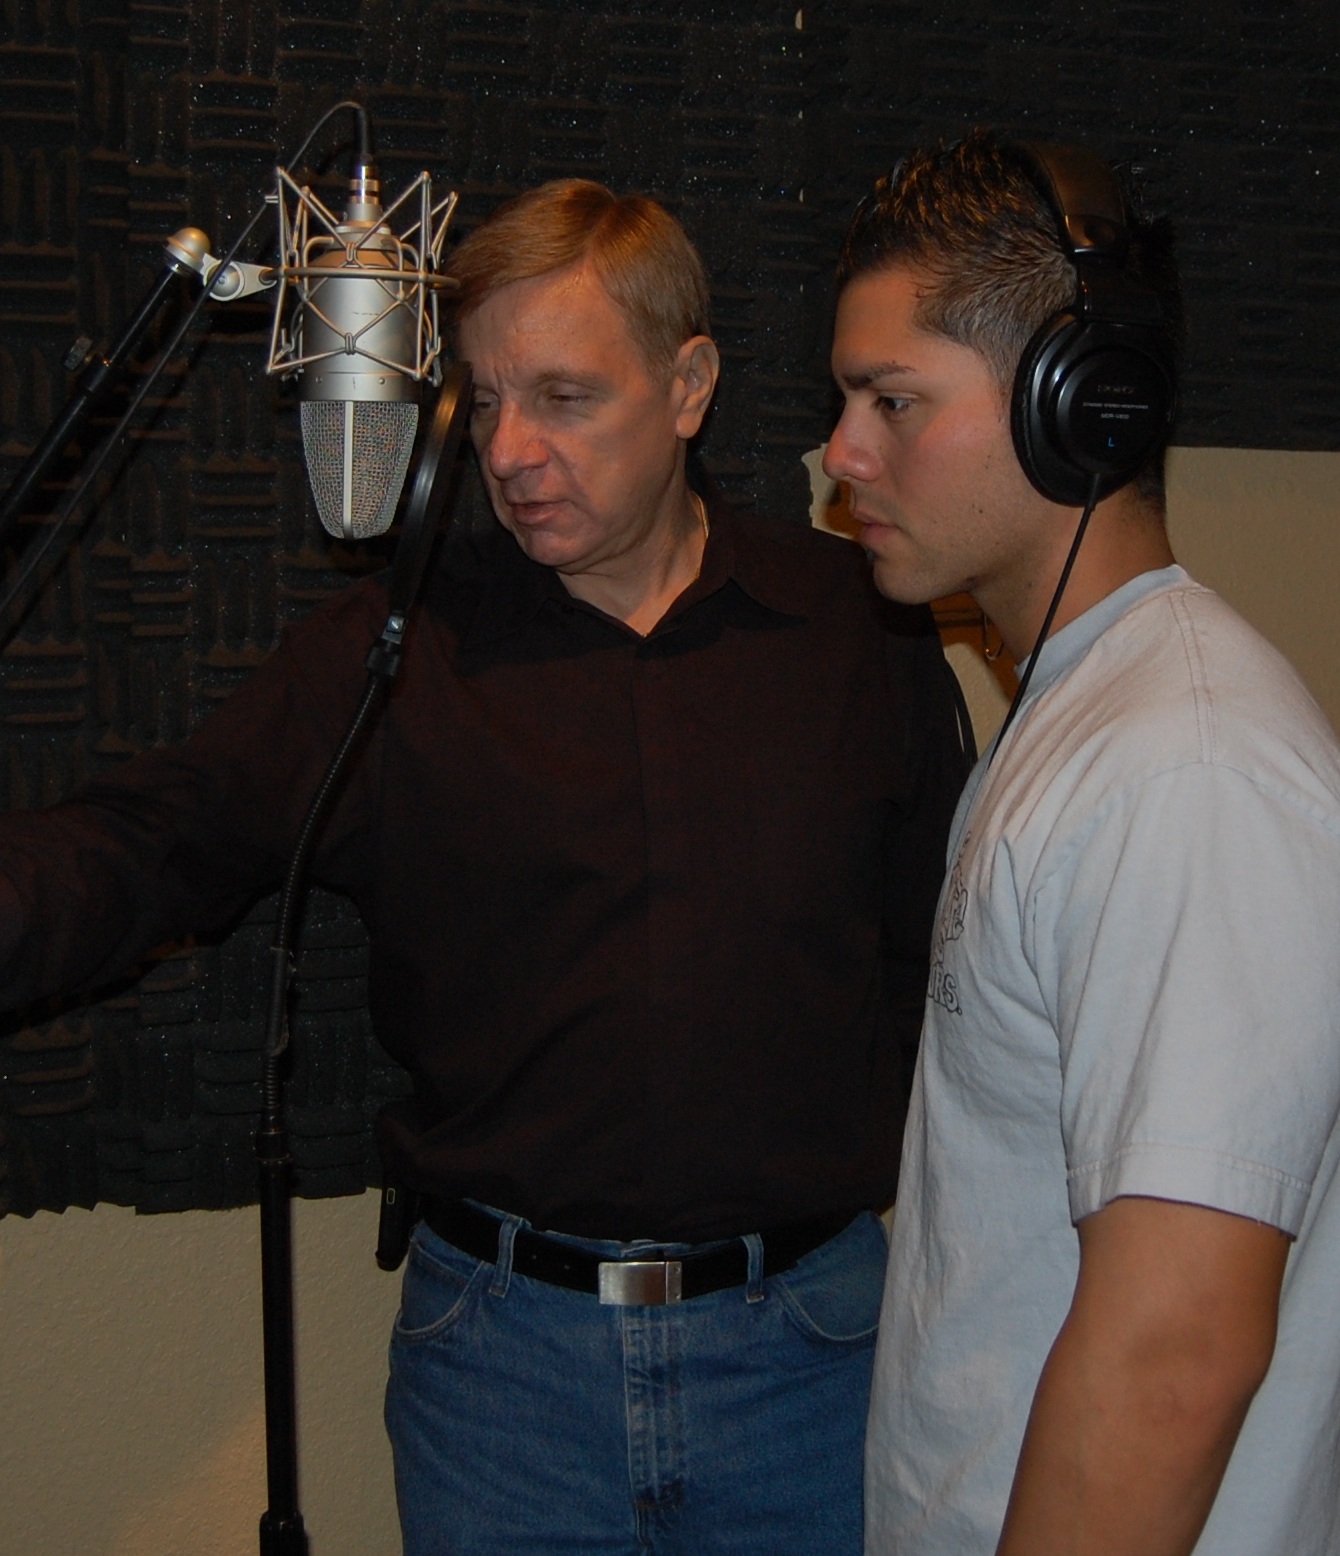 Kim Richards with Nick Cardenas, oldest son of Renegade drummer and vocalist Luis Cardenas. Young Nick was in the studio contributing both vocal and drum skills for his father's upcoming solo offering. Richards, who is producing, is seen here giving Nick some guidance during a recent recording session.